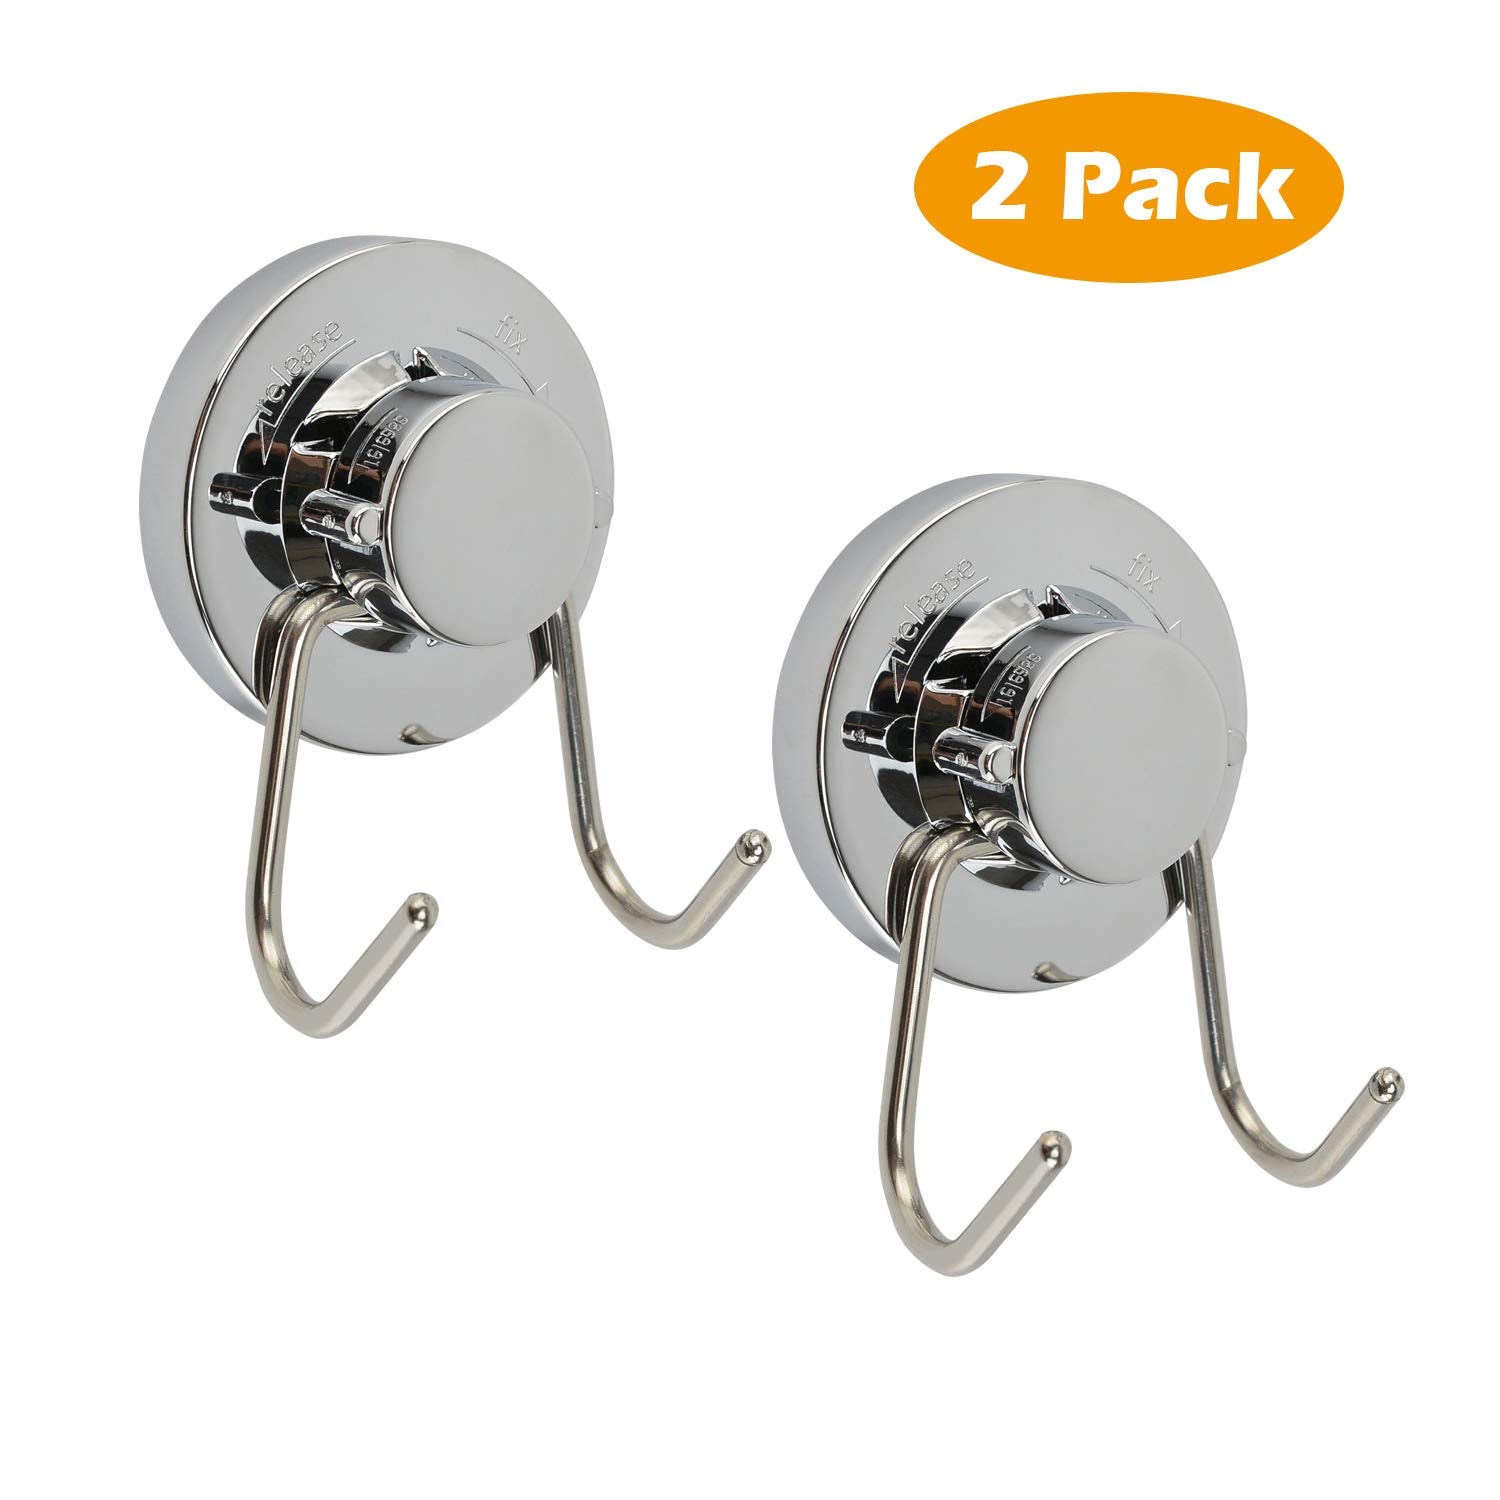 Neady 2 Pack Double Suction Cup Hooks Shower Hooks Bathroom and Kitchen Stainless Steel Hooks Hanger for Bath Robe, Towels, Coat, Loofah (Stainless Steel Suction Cup Hooks)